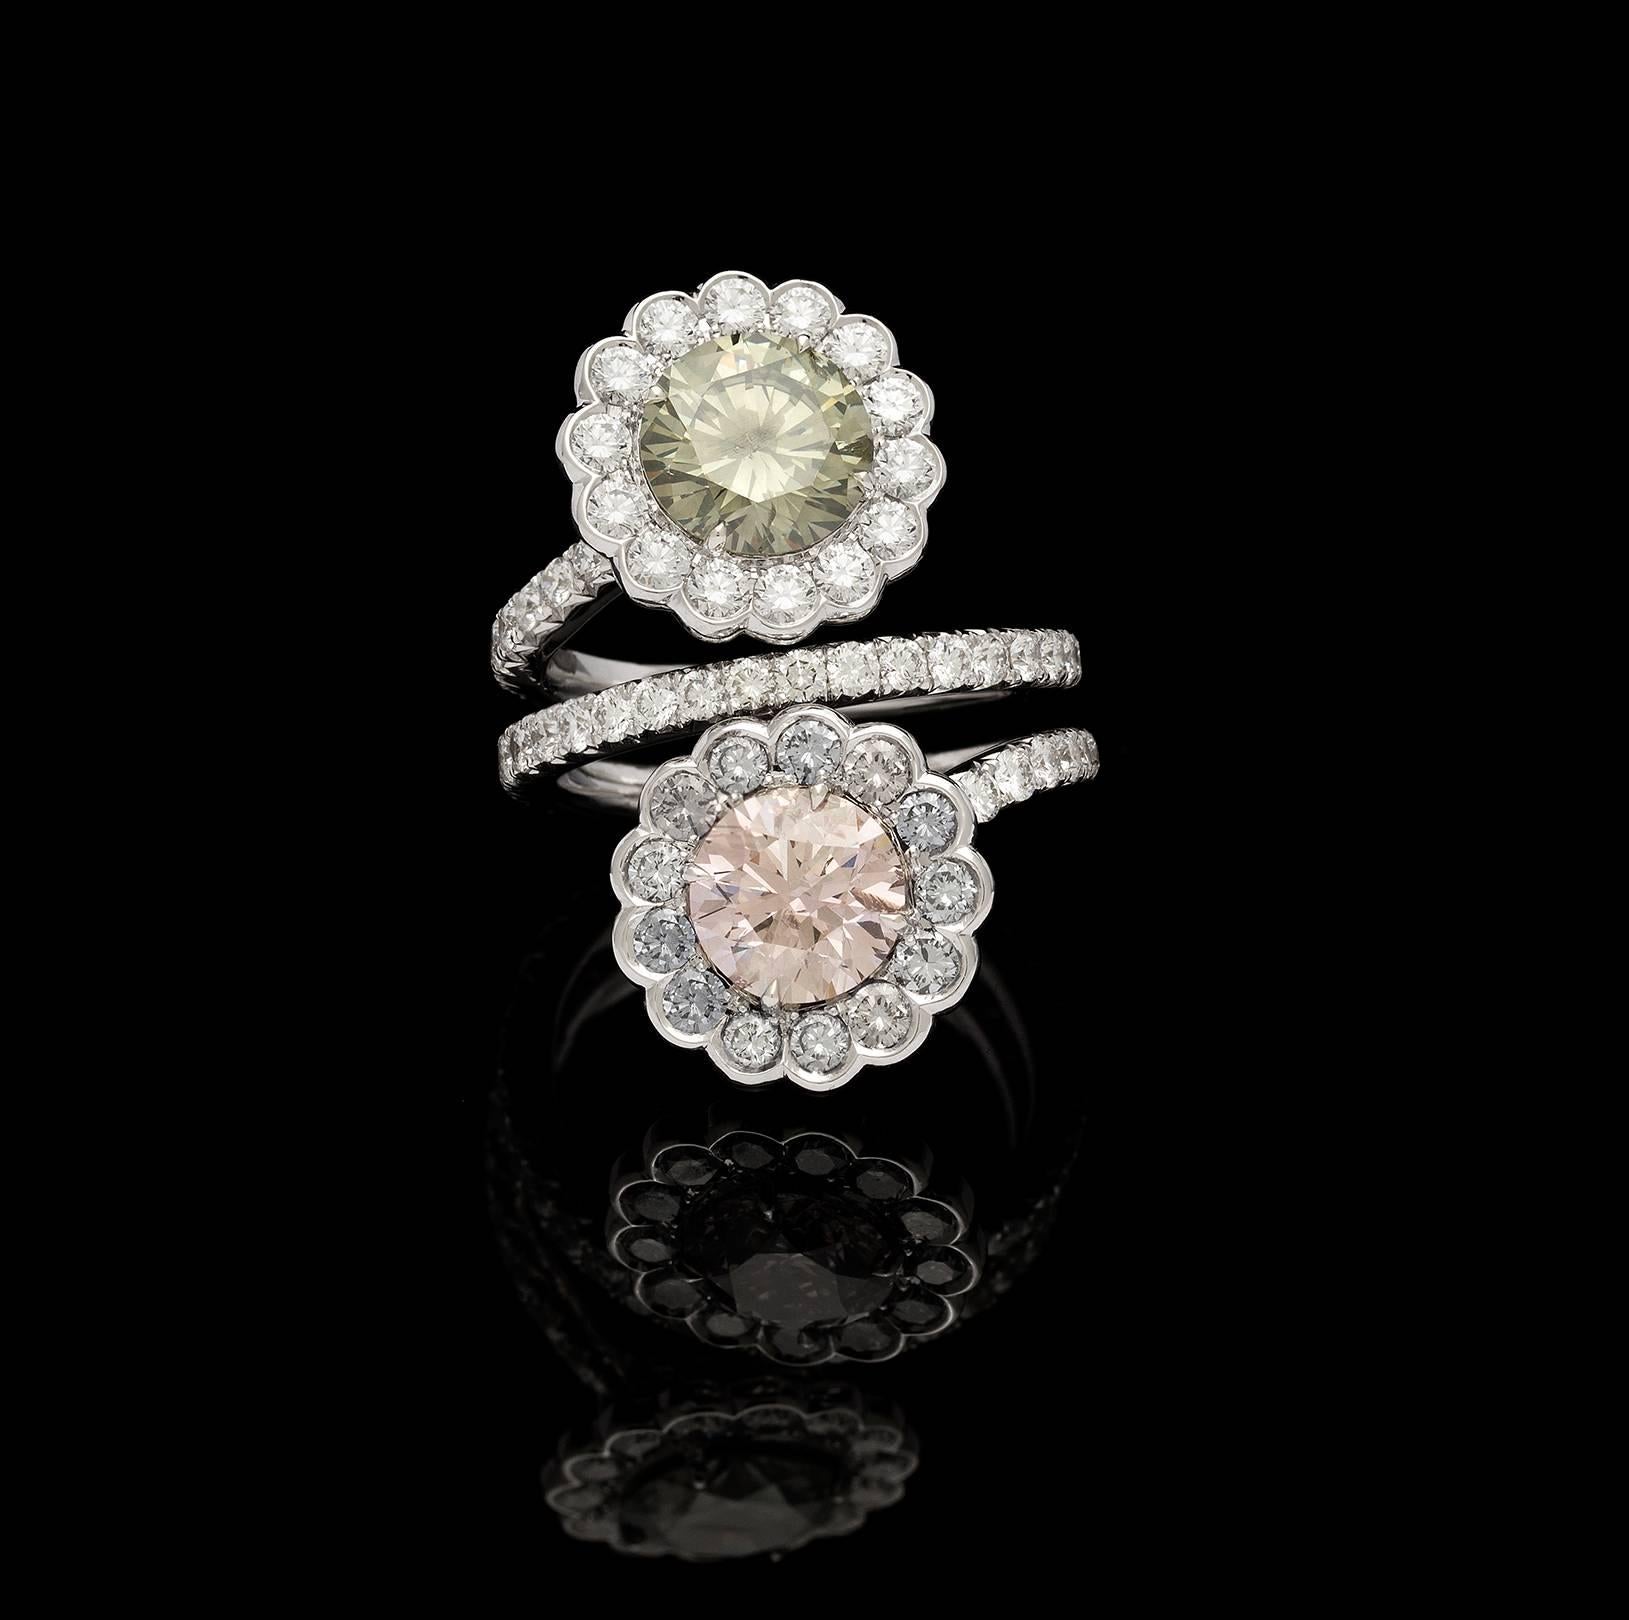 The 18k white gold flower bypass ring features a GIA 1.93-carat fancy dark greenish-gray round brilliant-cut diamond and a GIA 1.70-carat fancy brown-pink round brilliant-cut diamond. Each stone is surrounded by blue-gray and near colorless round